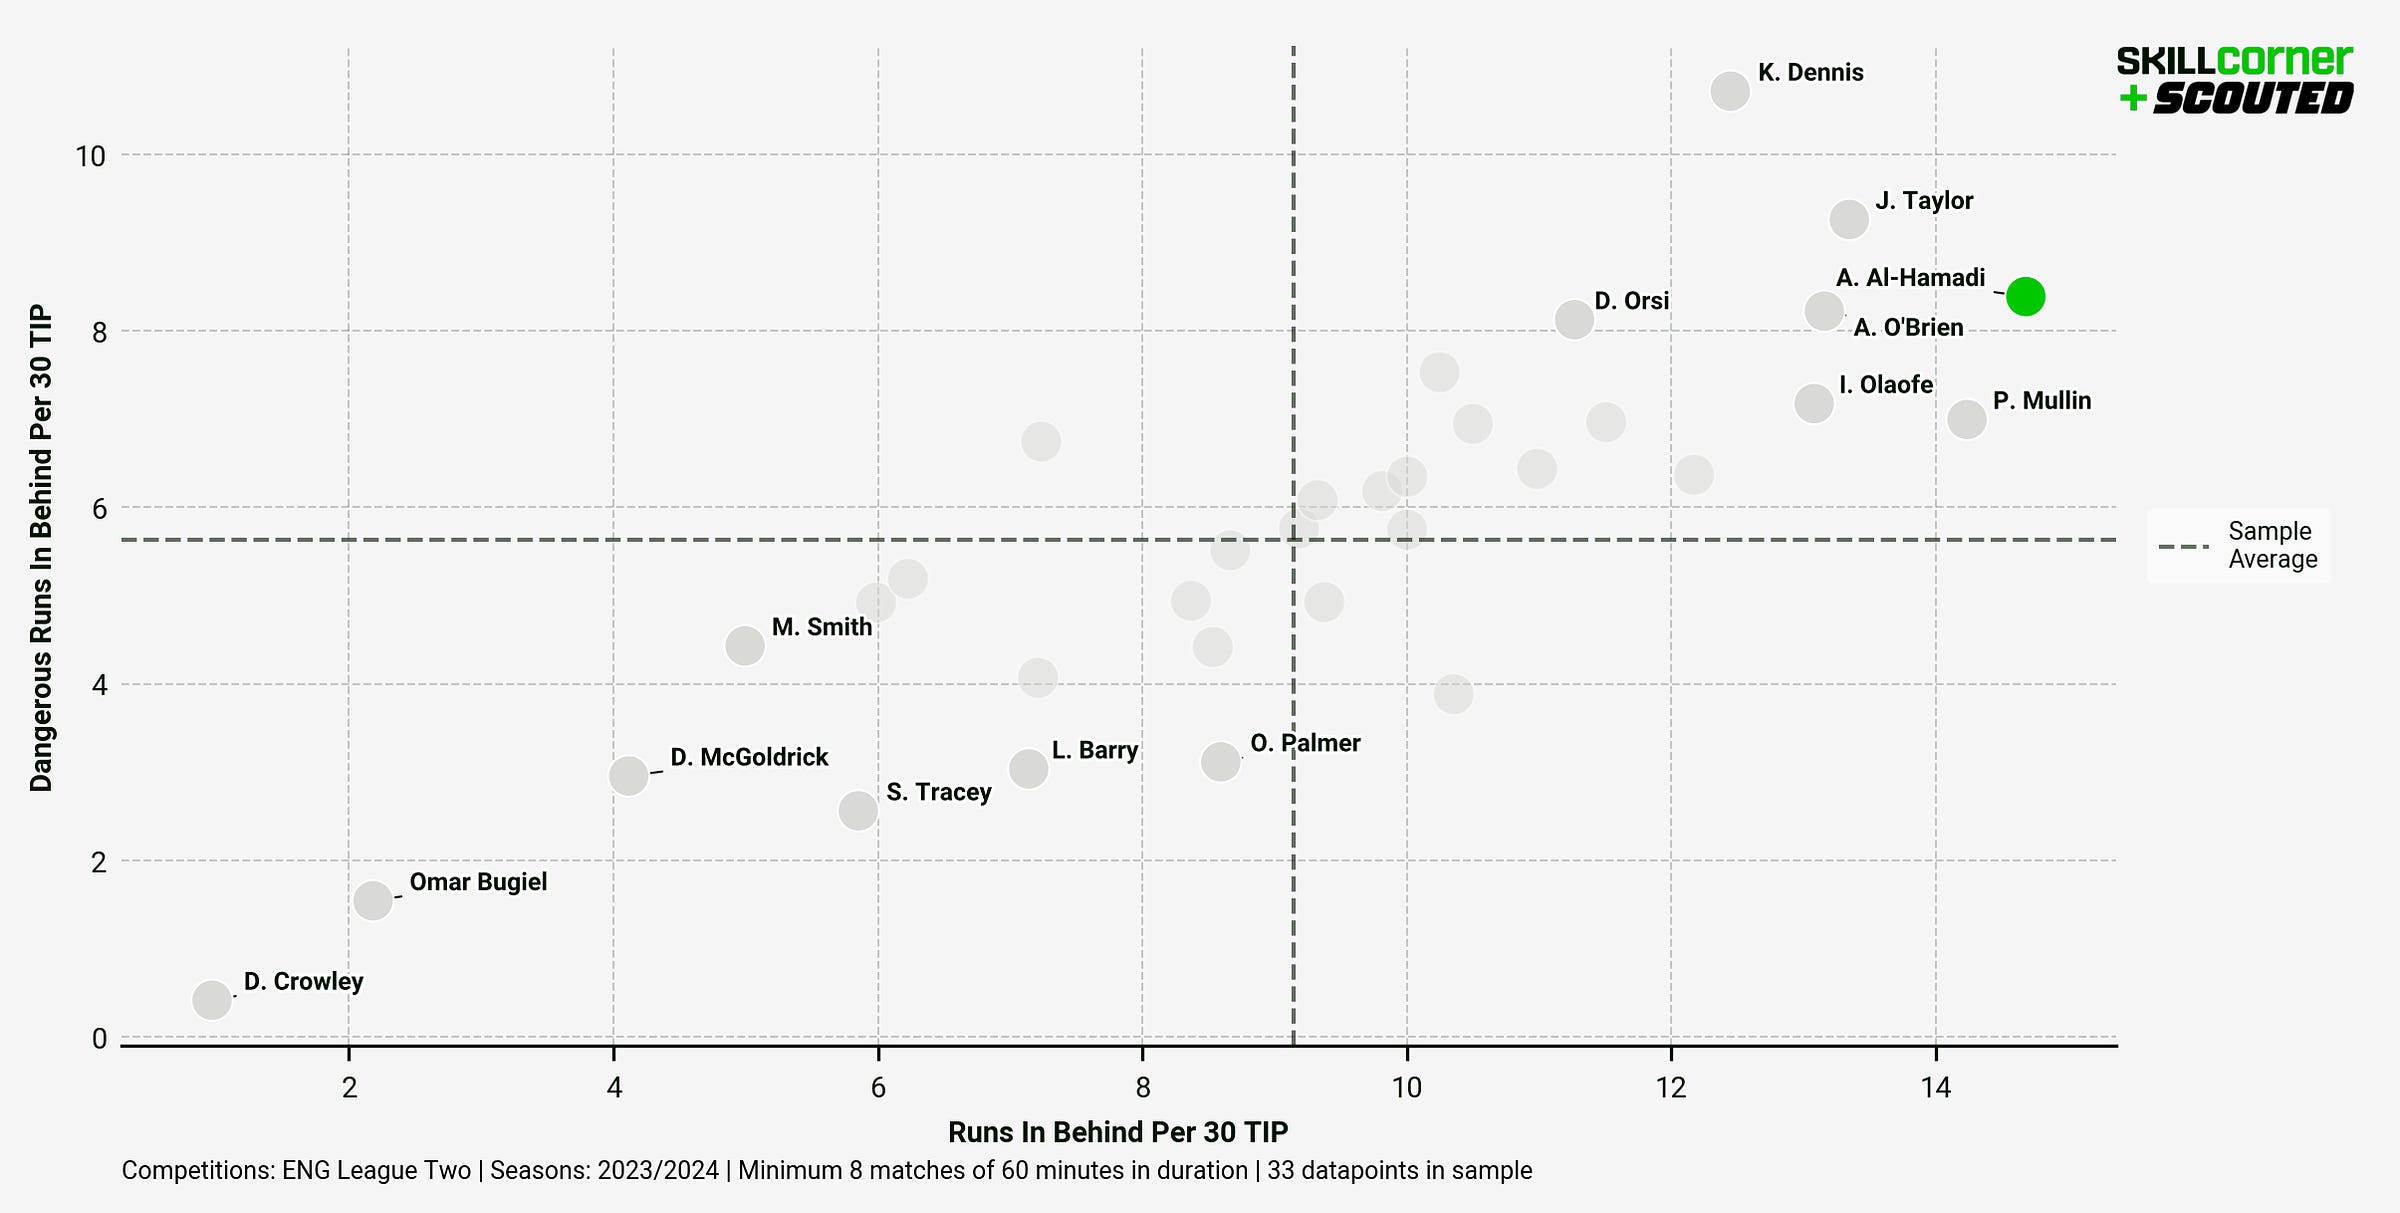 A SCOUTED x SkillCorner graph plotting Dangerous Runs In Behind per 30 TIP against Runs In Behind per 30 TIP among all League Two forwards in the 2023/24 season.